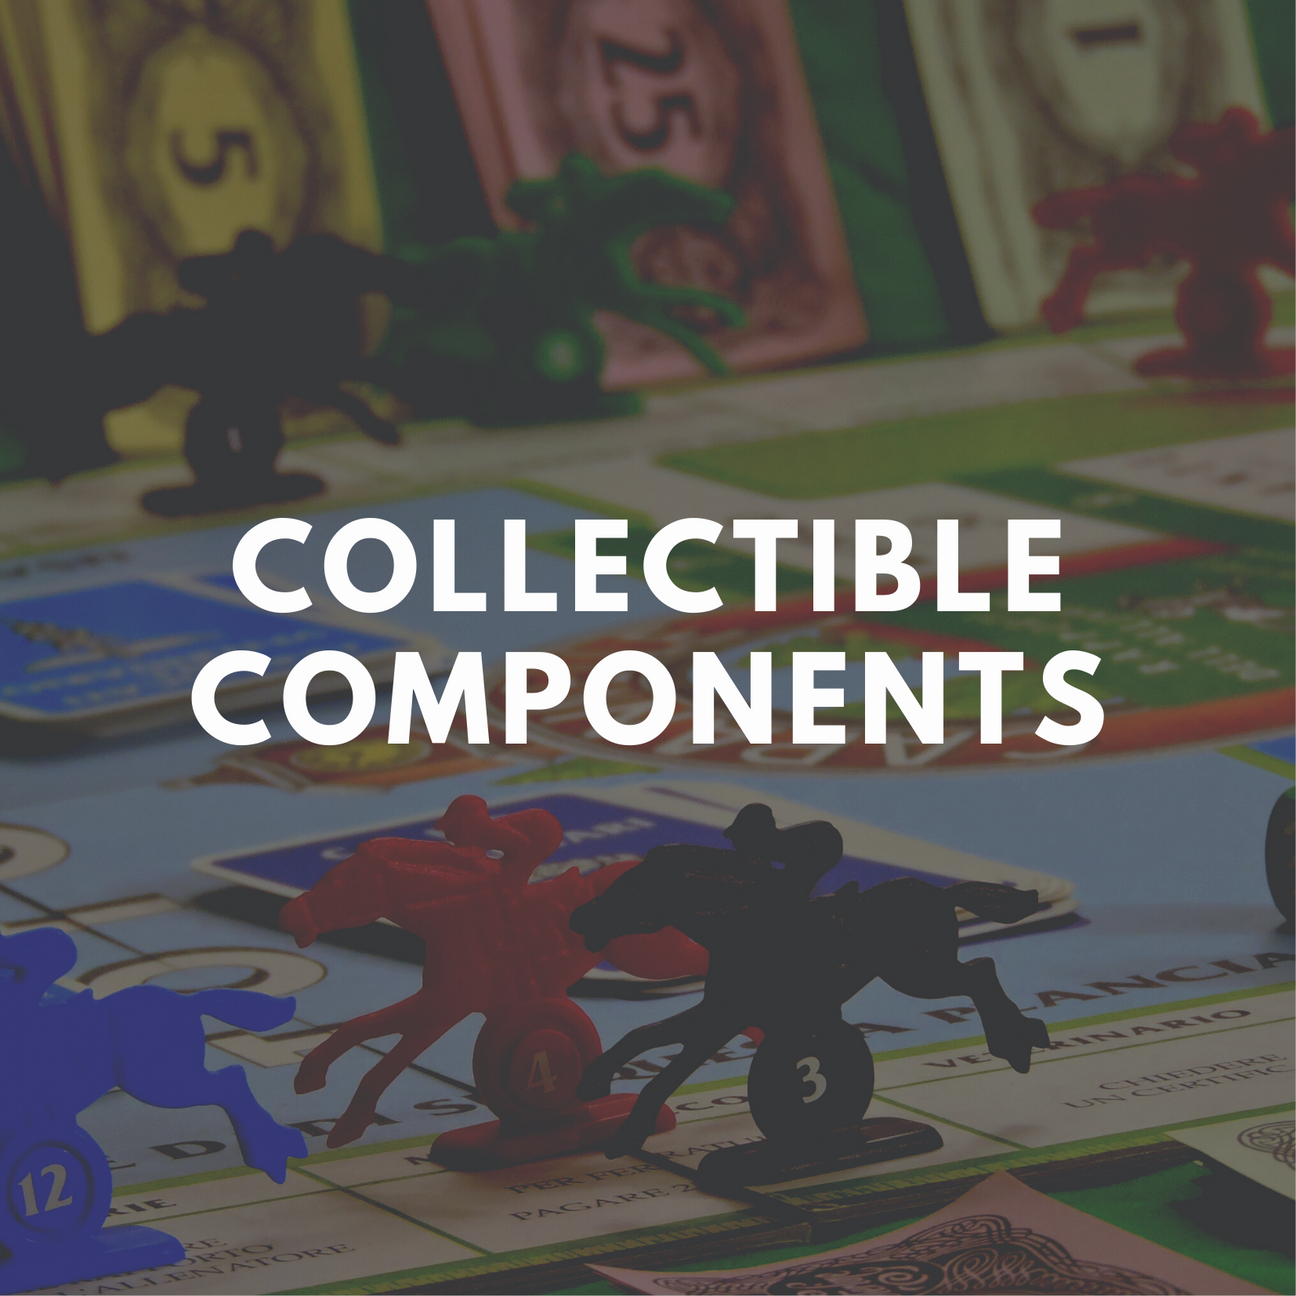 Collectable Components